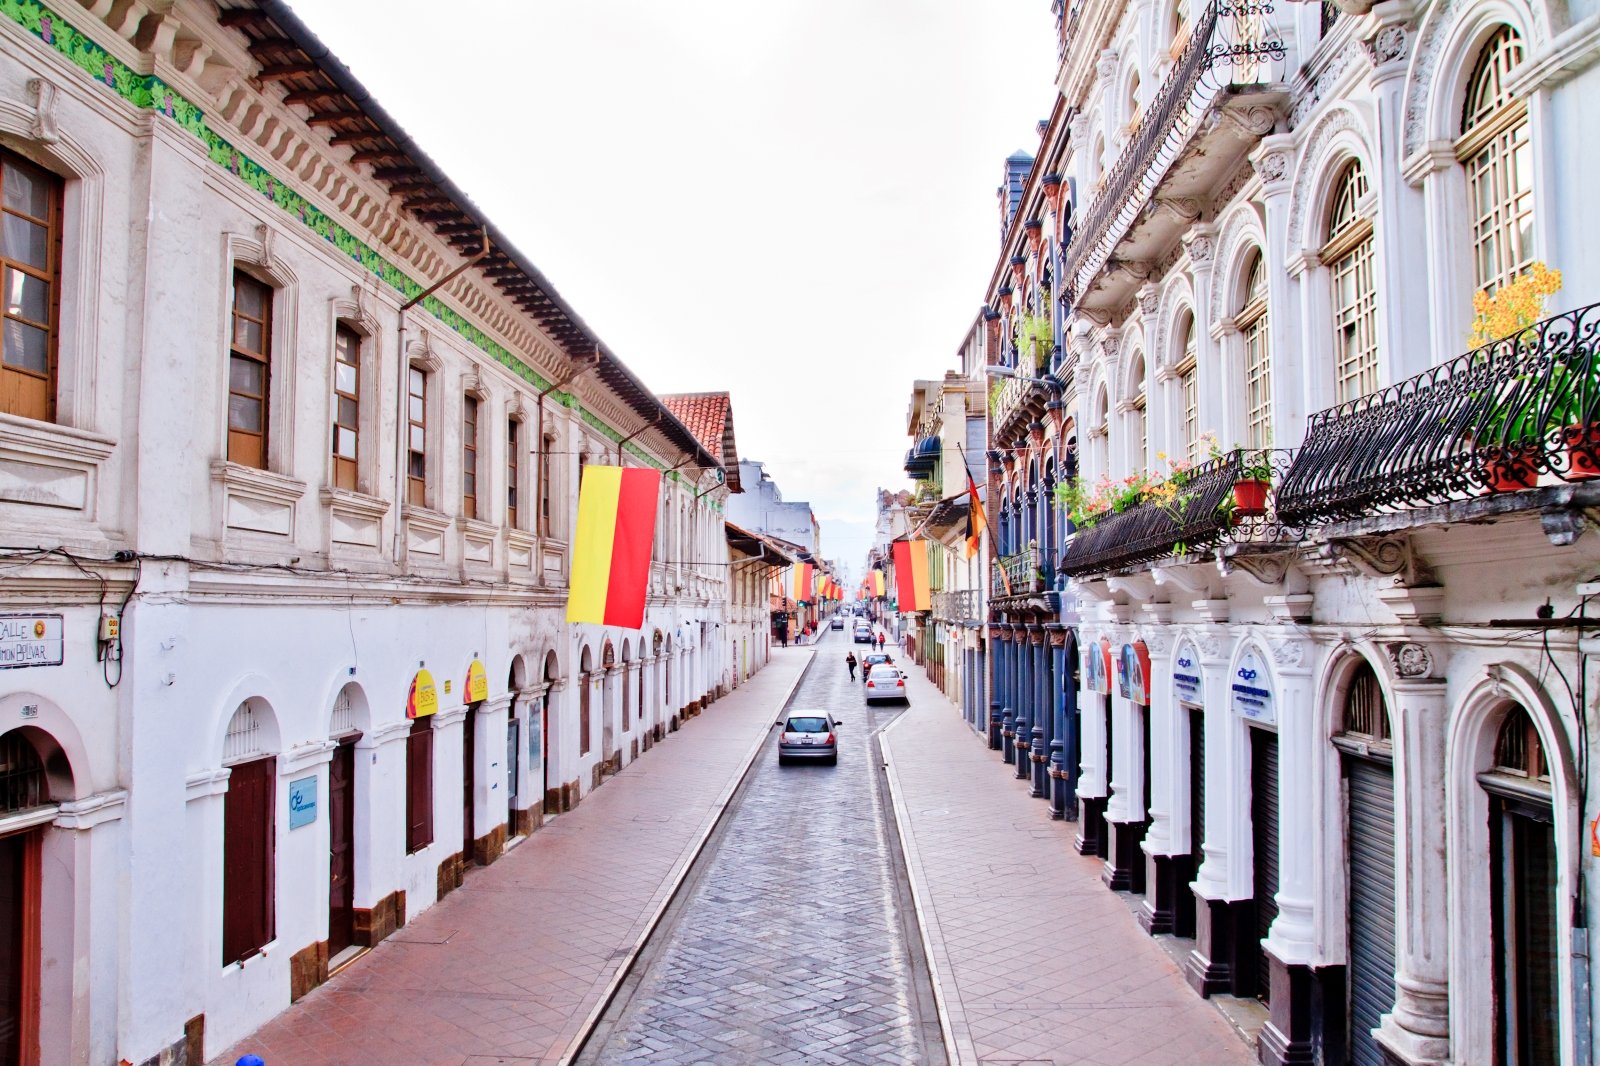 <p>Brazil’s vibrant cities and lush rainforests beckon adventurers and beach-goers alike. Over in <strong>Ecuador</strong>, <strong>Quito</strong> stands out as a city teeming with colonial history, nestled among volcanic peaks. The region promises a blend of natural splendor and enriching cultural encounters.</p>